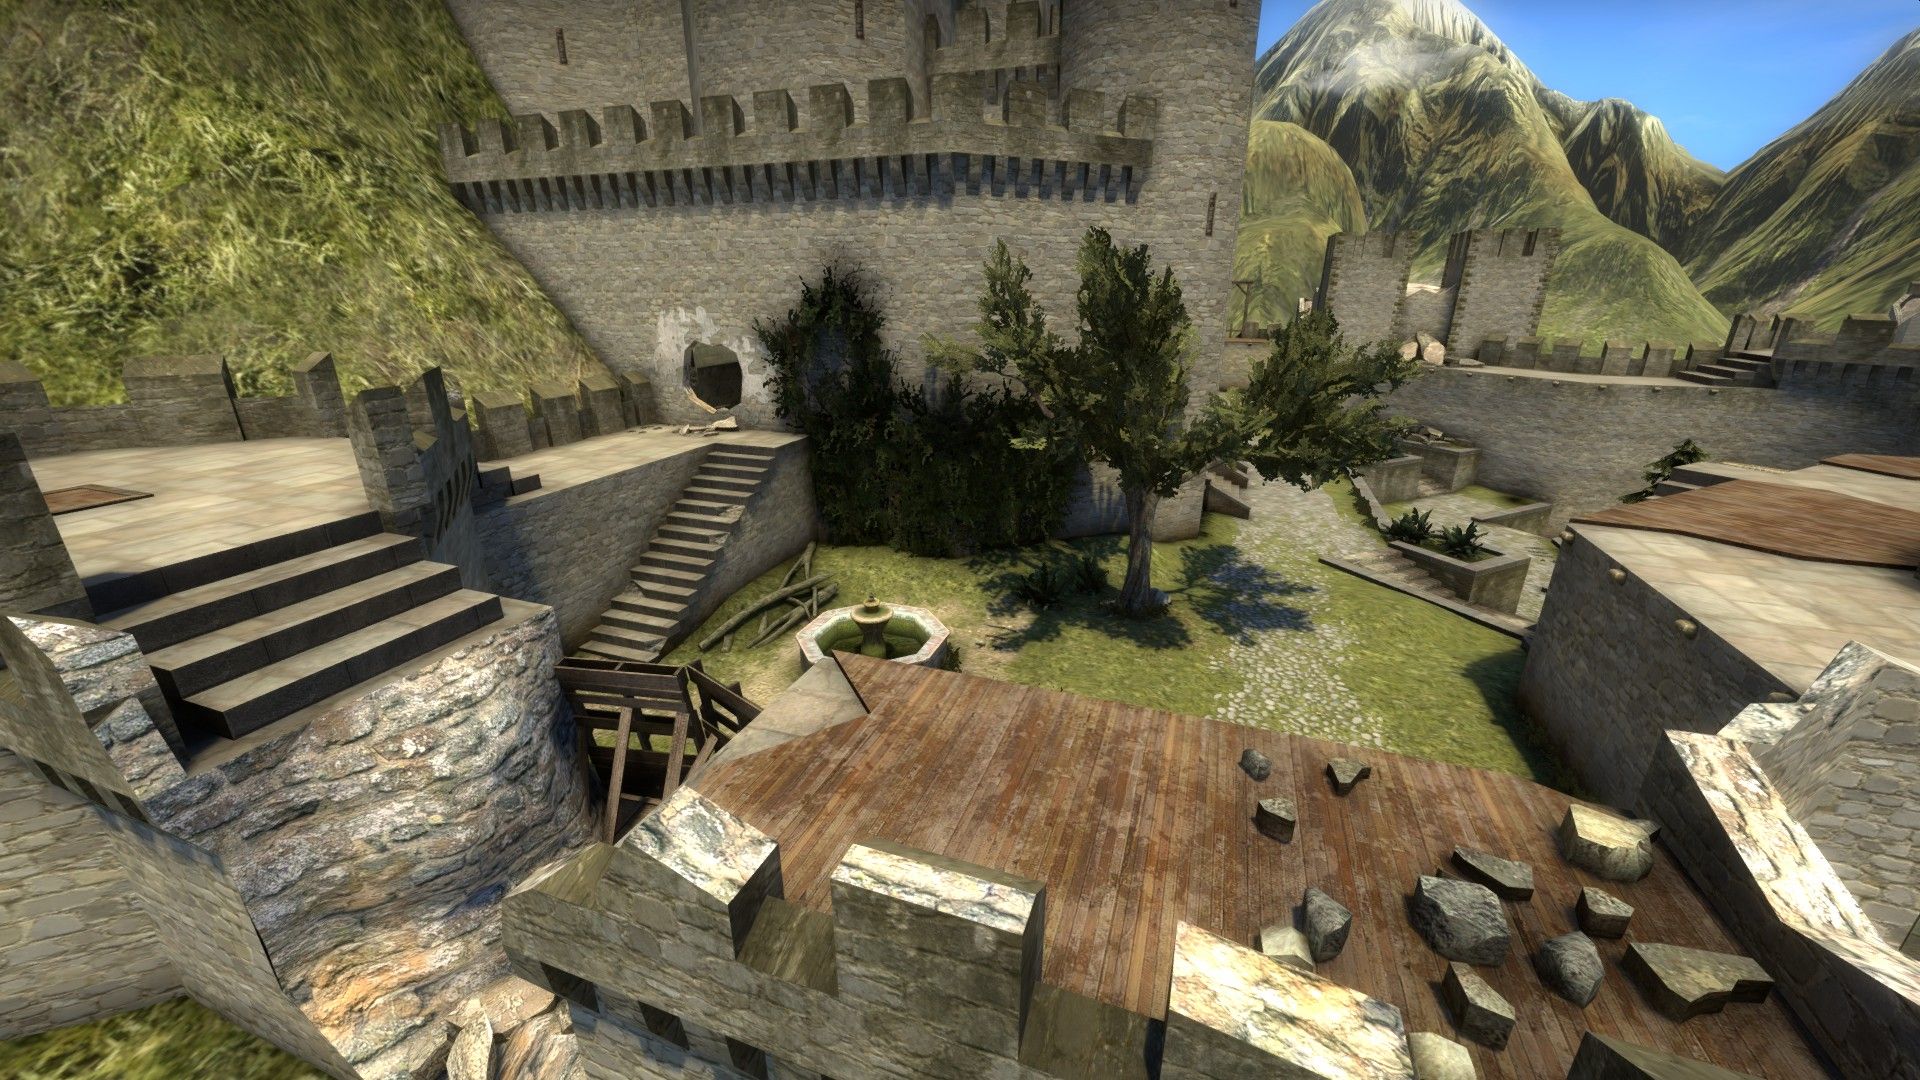 CS:GO meets The Witcher 3 with this new Kaer Morhen custom map